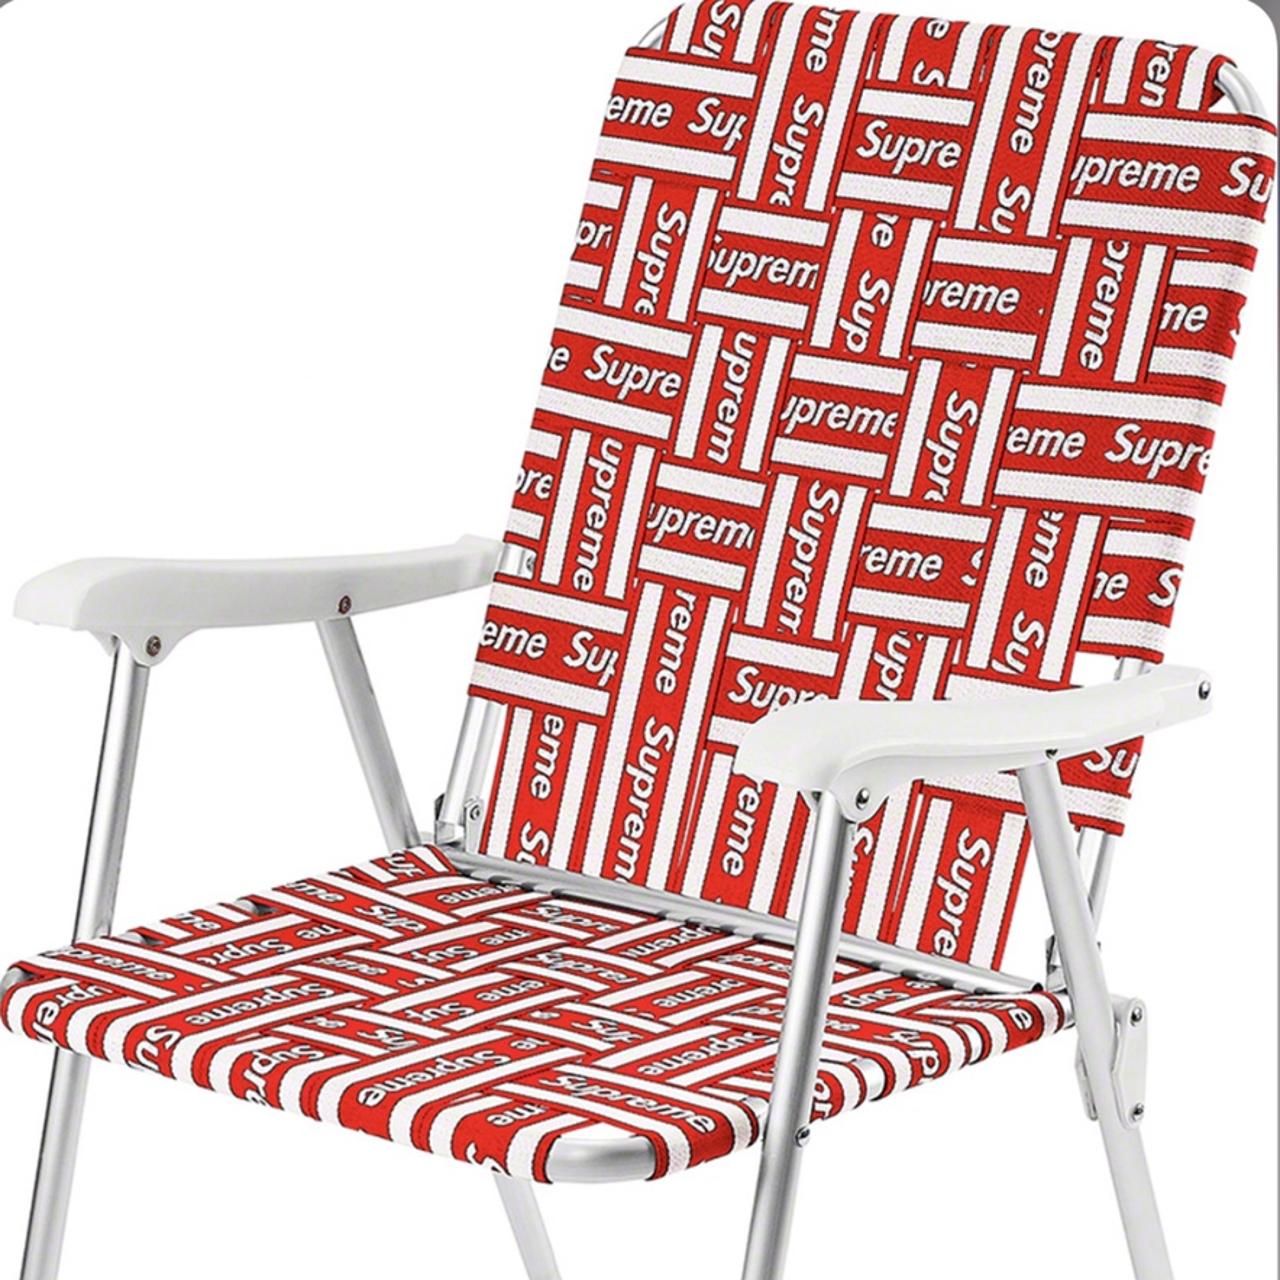 Supreme Lawn Chair Red, Deadstock unopened brand